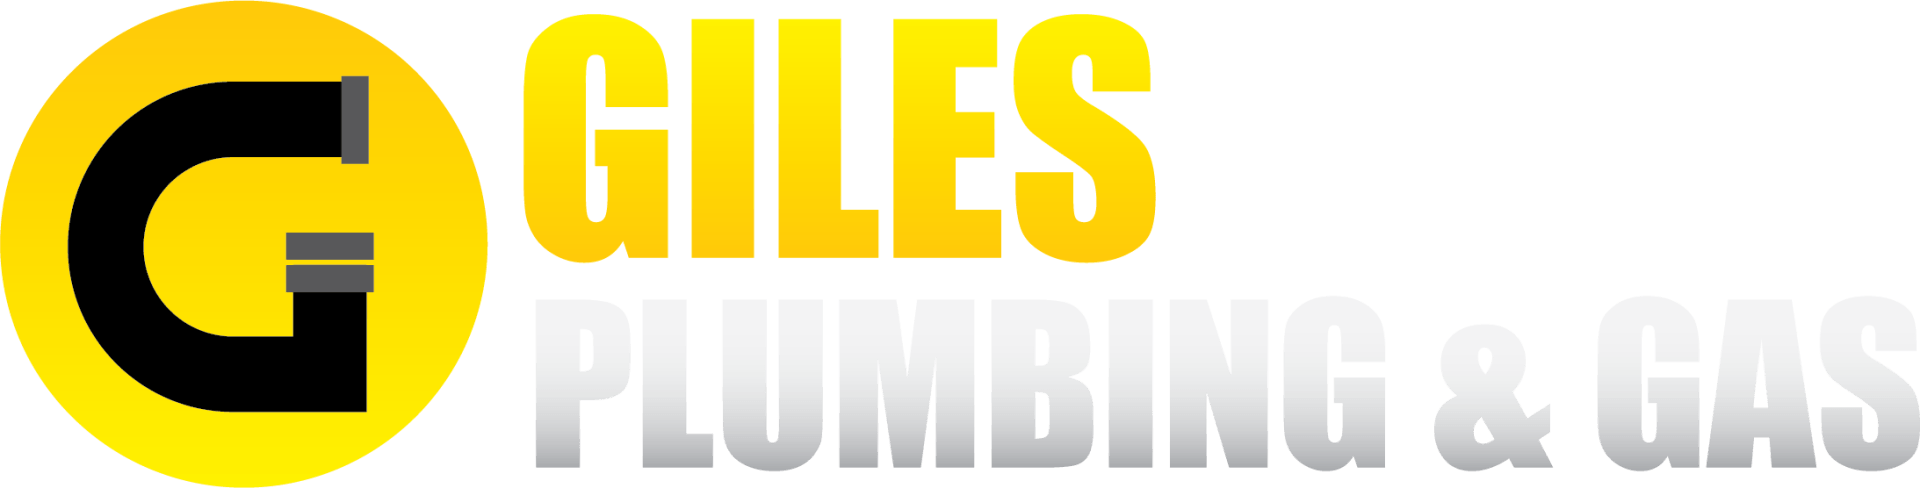 Welcome To Giles Plumbing & Gas—Plumbers & Gasfitters in the Darling Downs